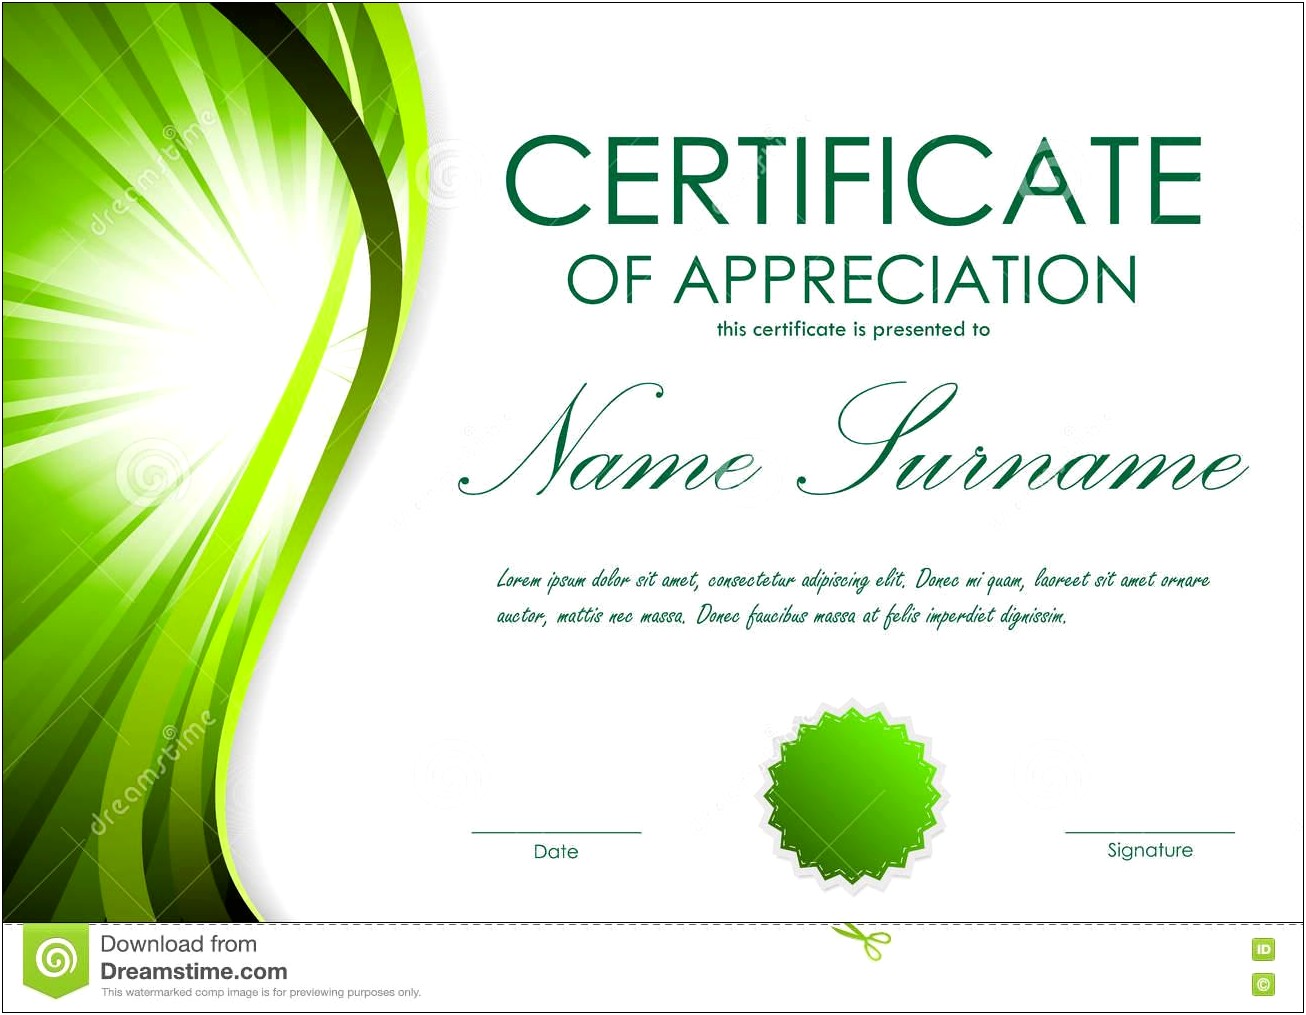 Certificate Of Appreciation Template Free Download Pdf Resume Example Gallery